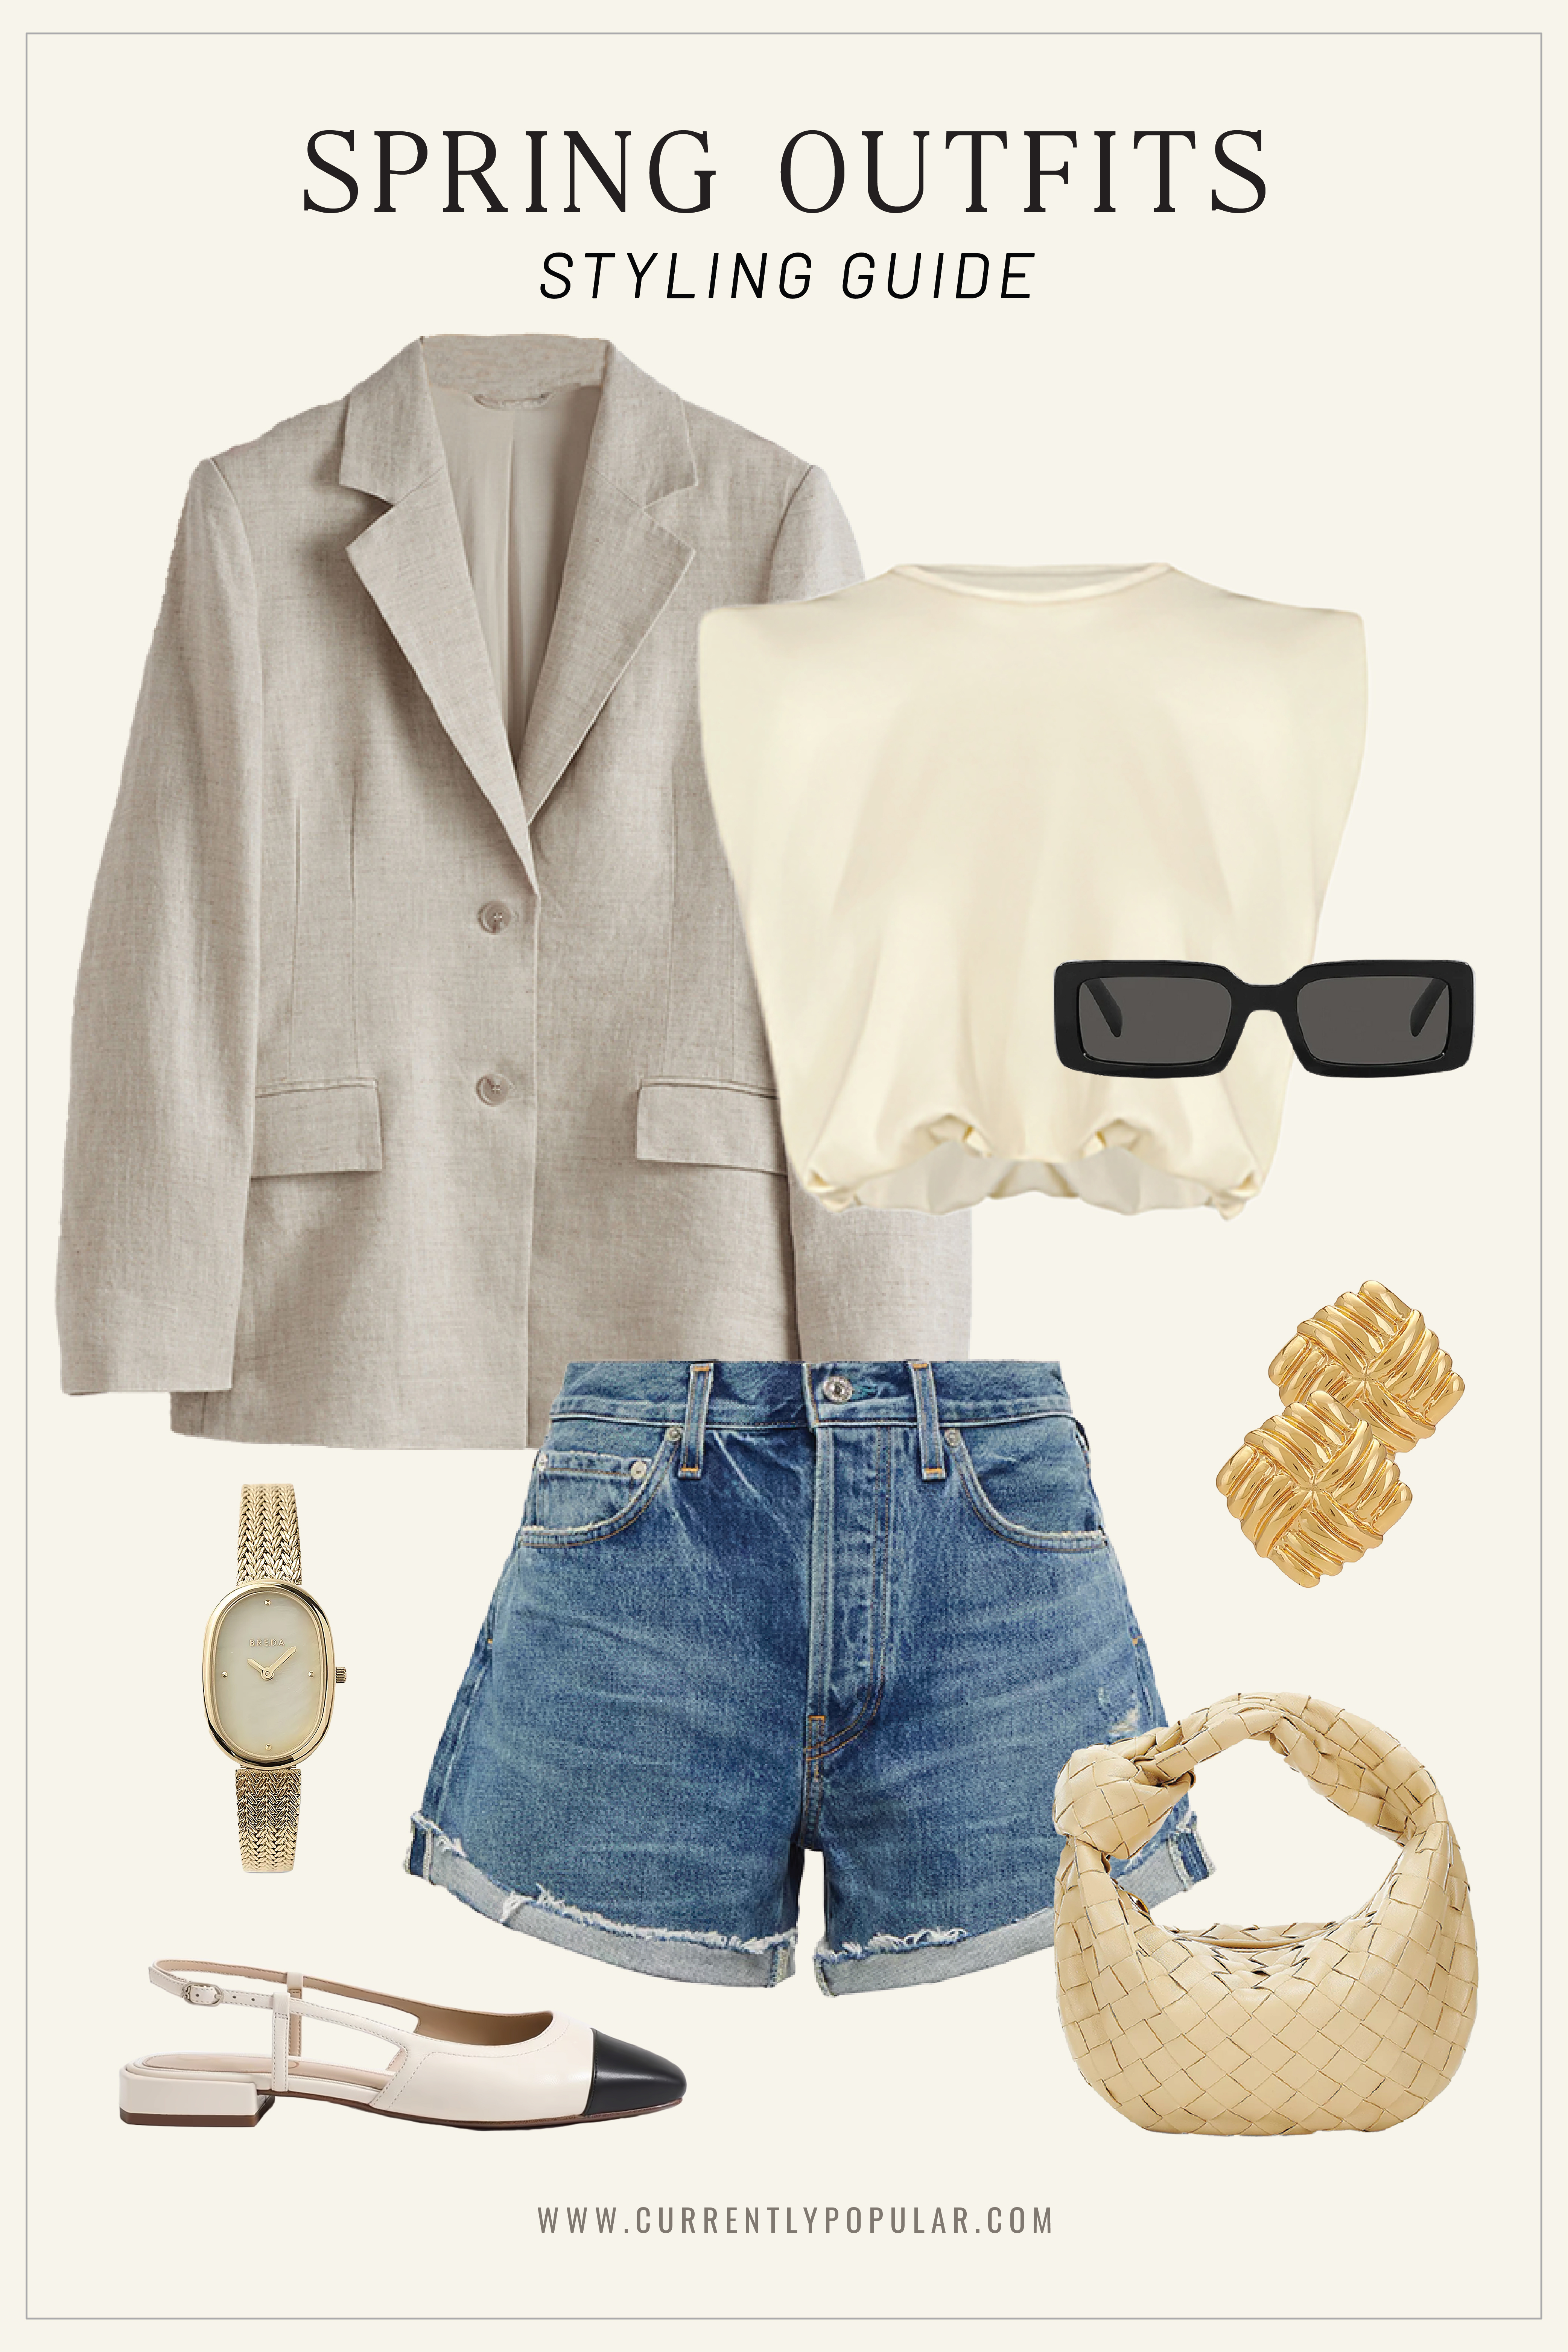 Casual Spring Outfit: Linen Blazer, White Top, Denim Shorts, White and Black Slingbacks, Woven Bag.